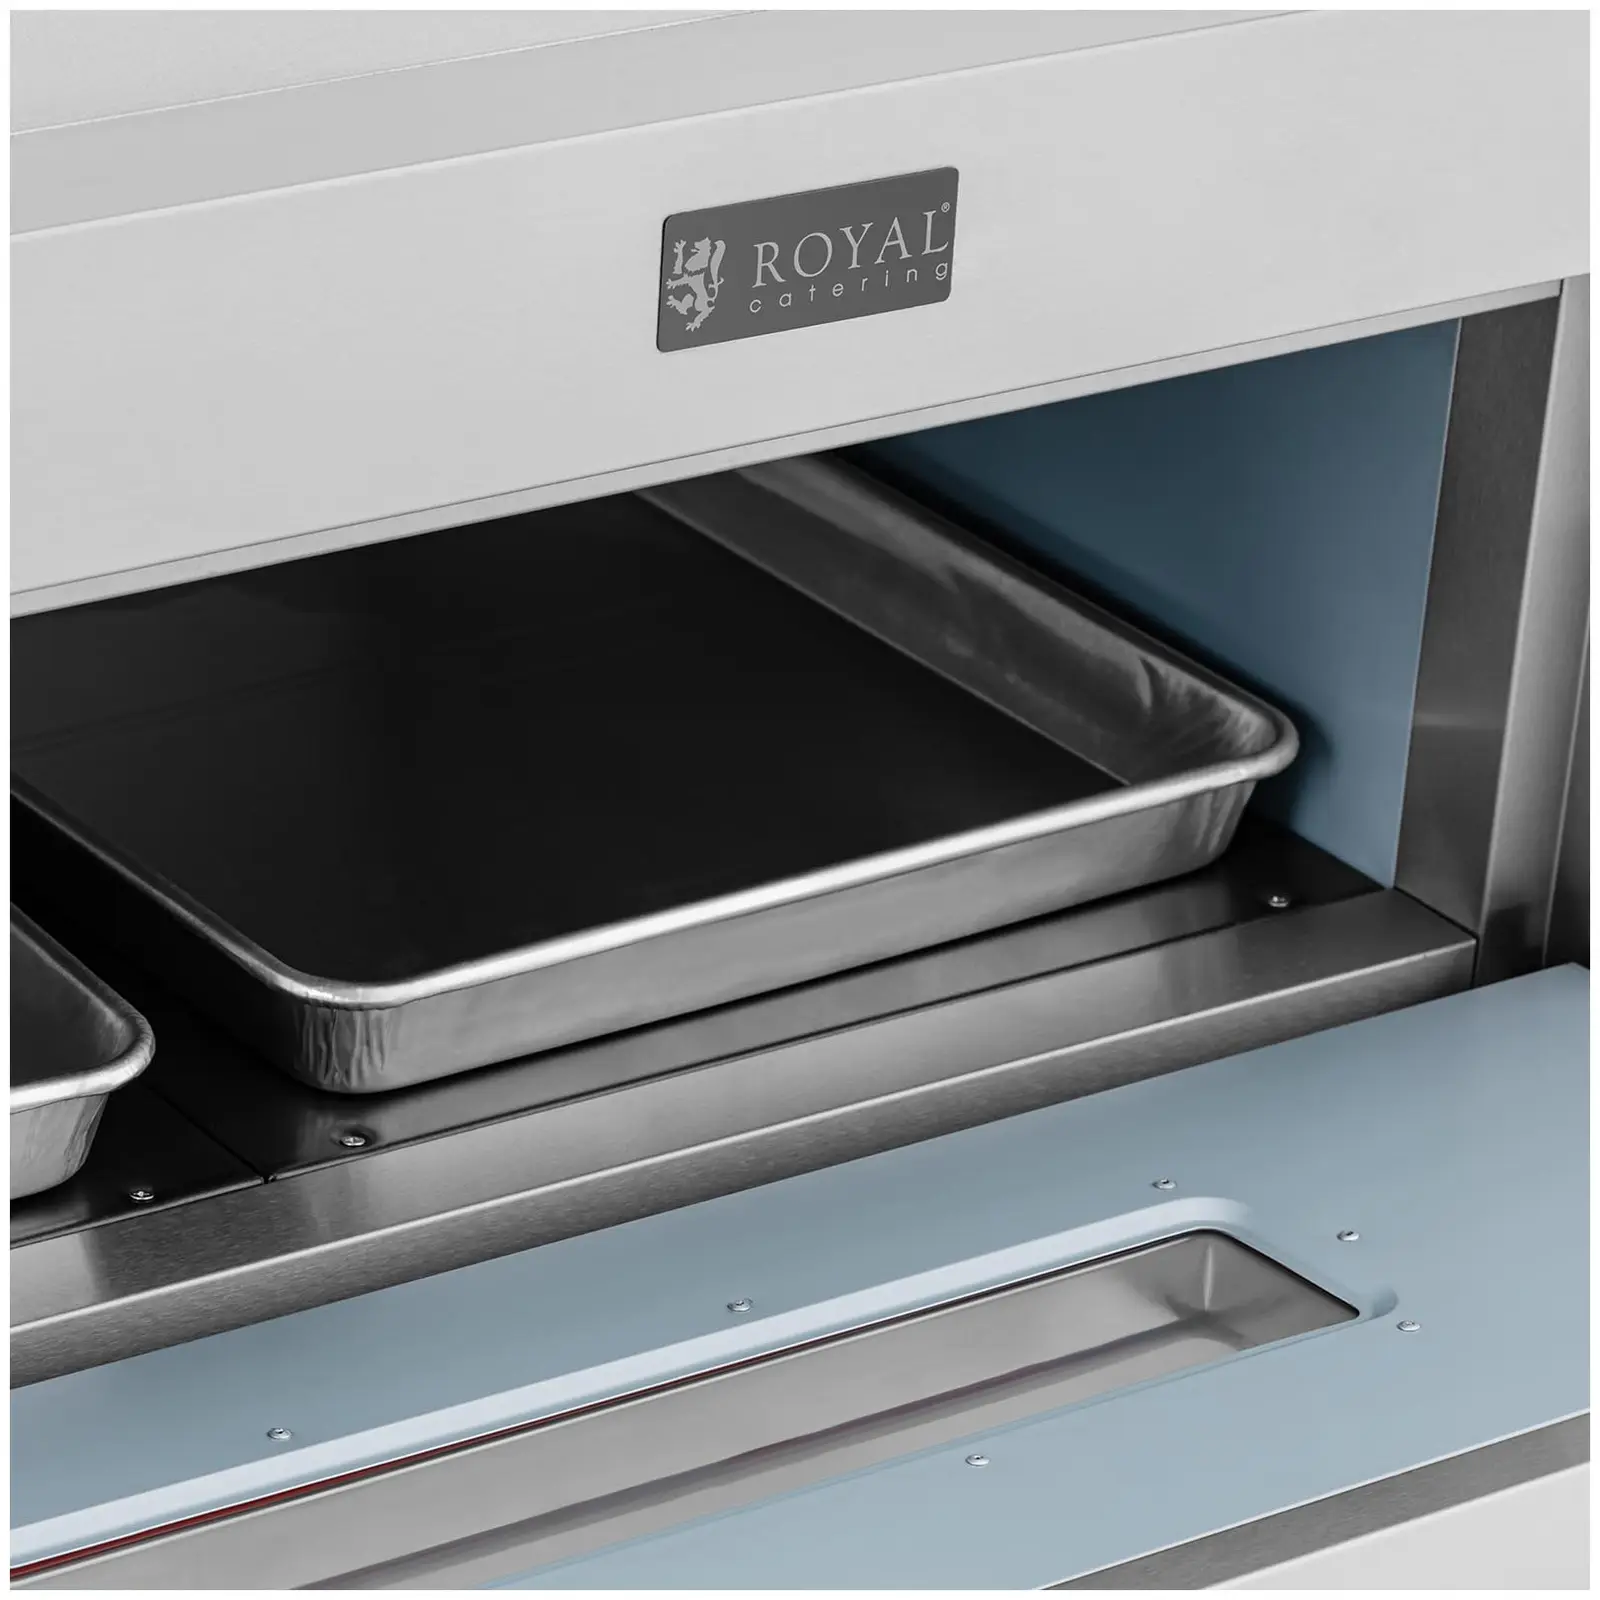 Outlet Piec gastronomiczny - 6600 W - 2 blachy (60 x 40 cm) - Royal Catering